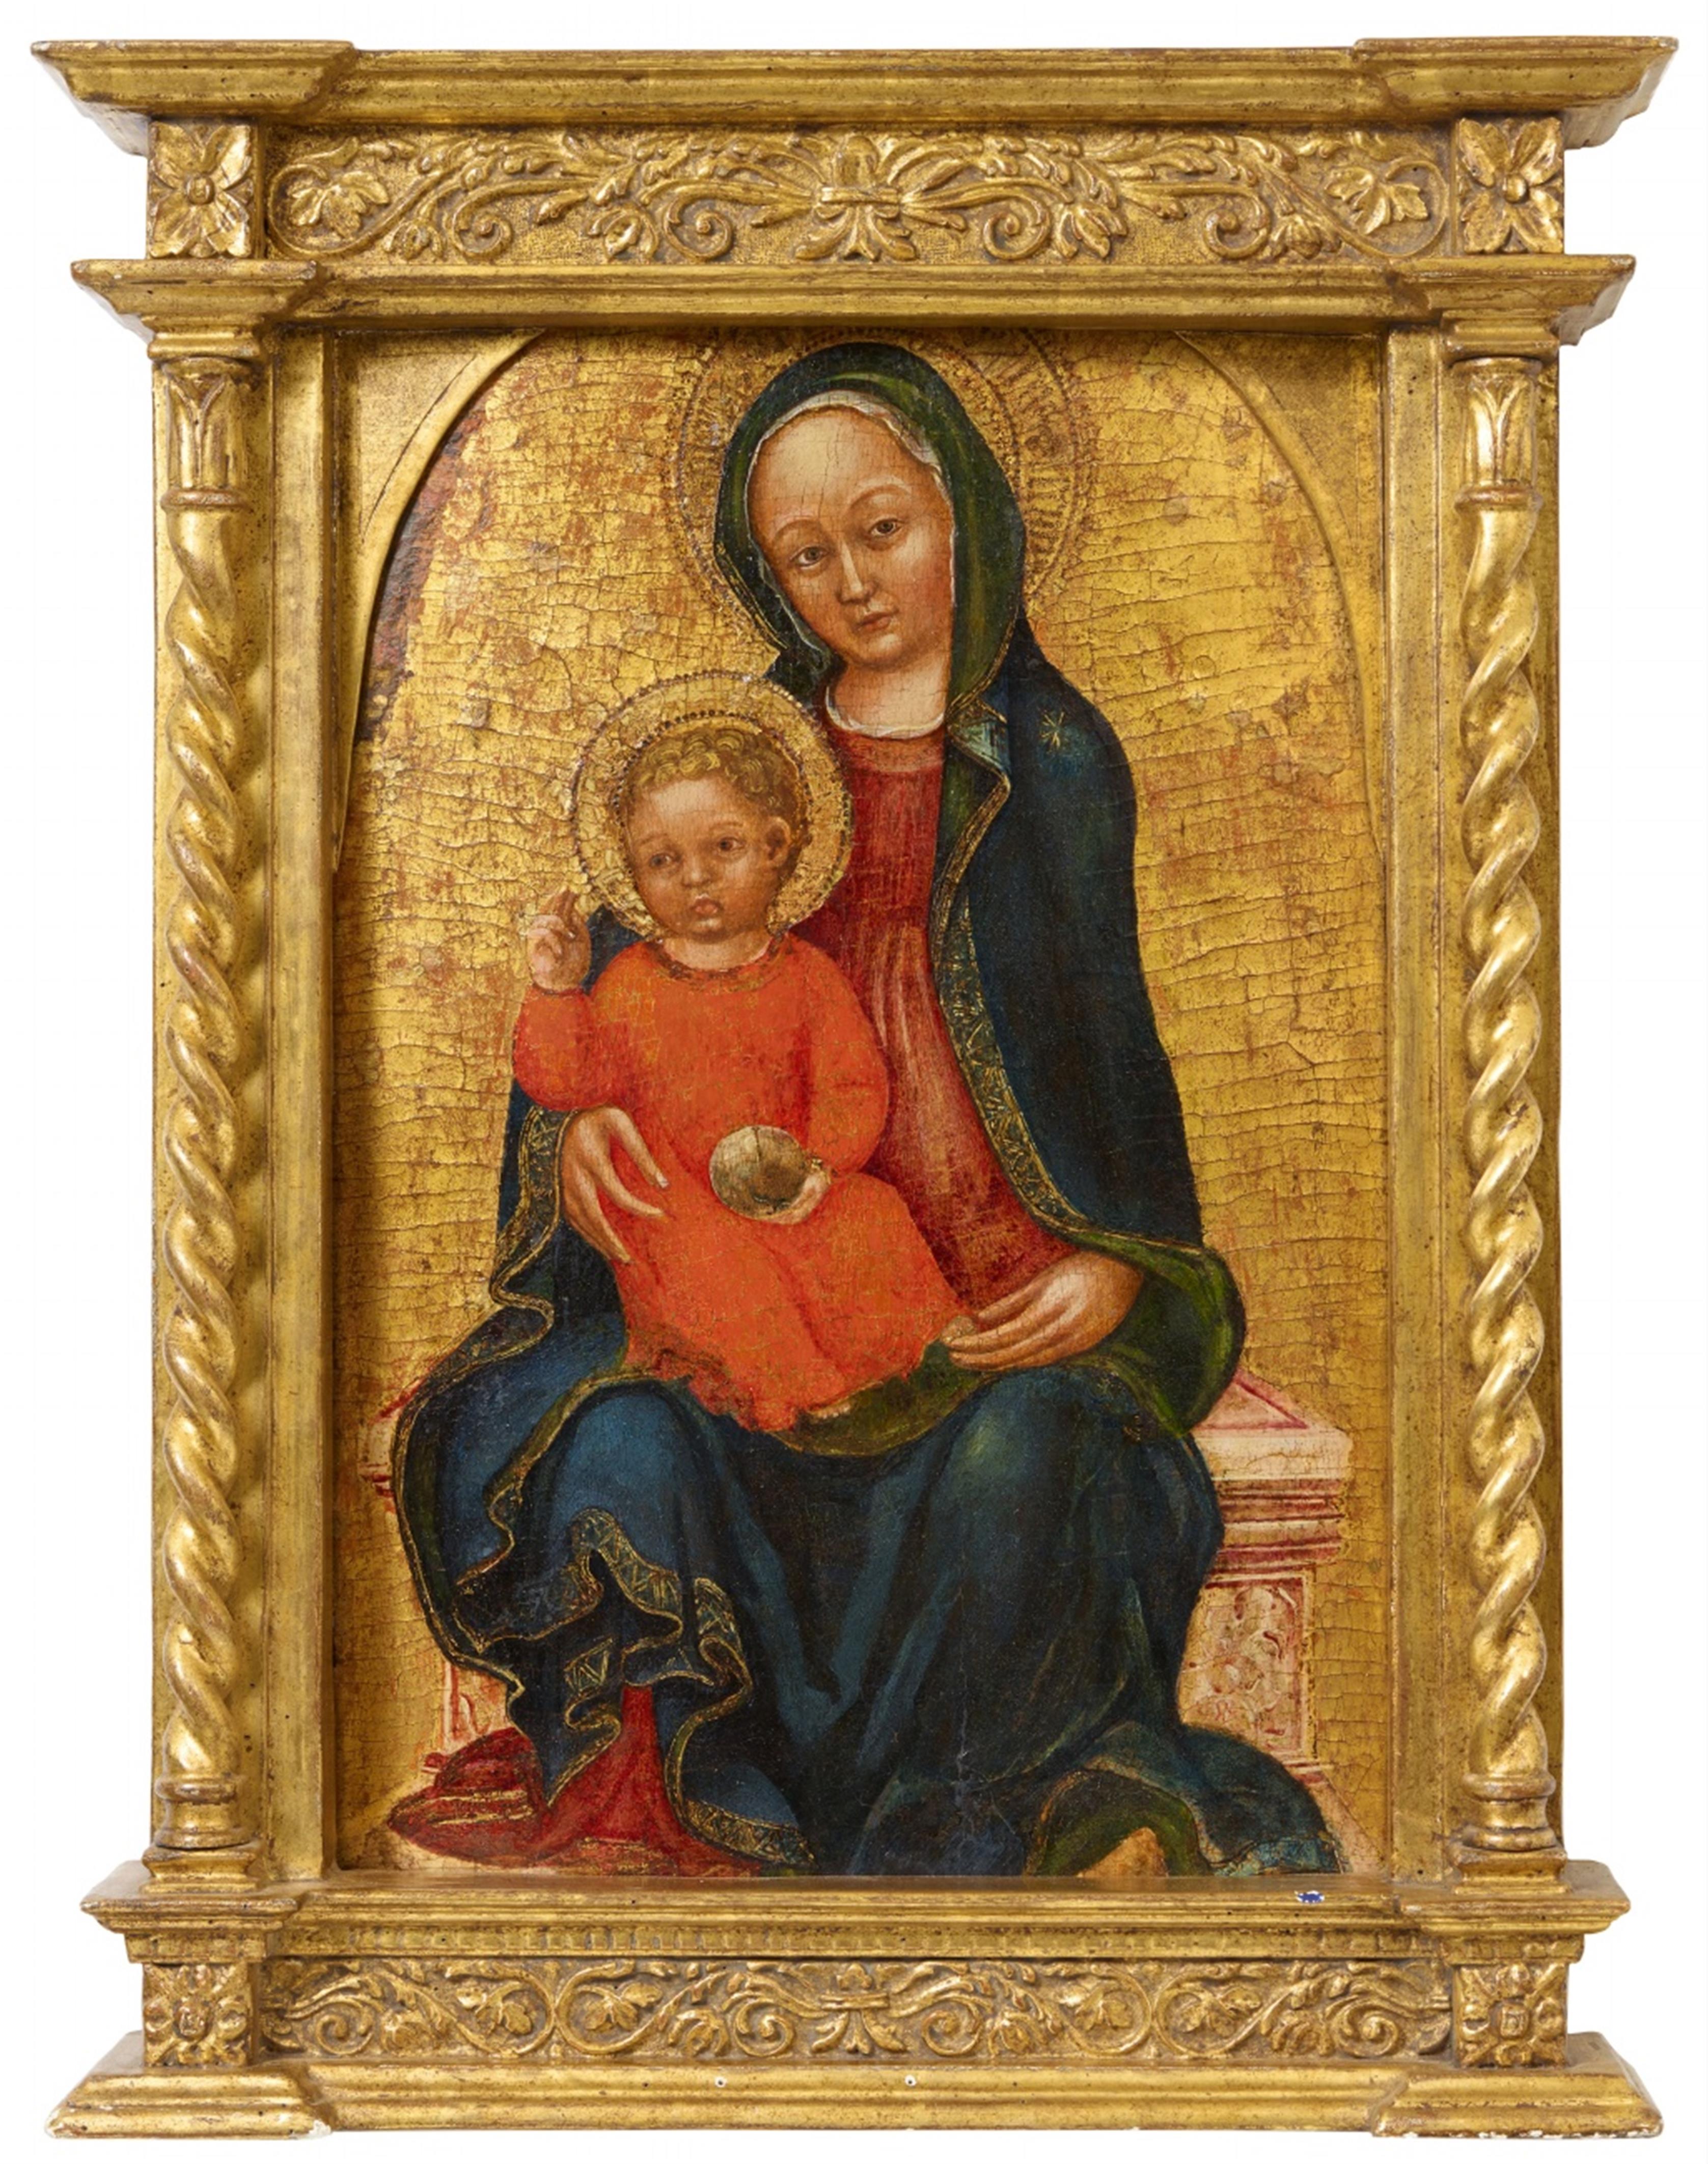 Umbrian School 15th century - The Virgin with Child - image-1